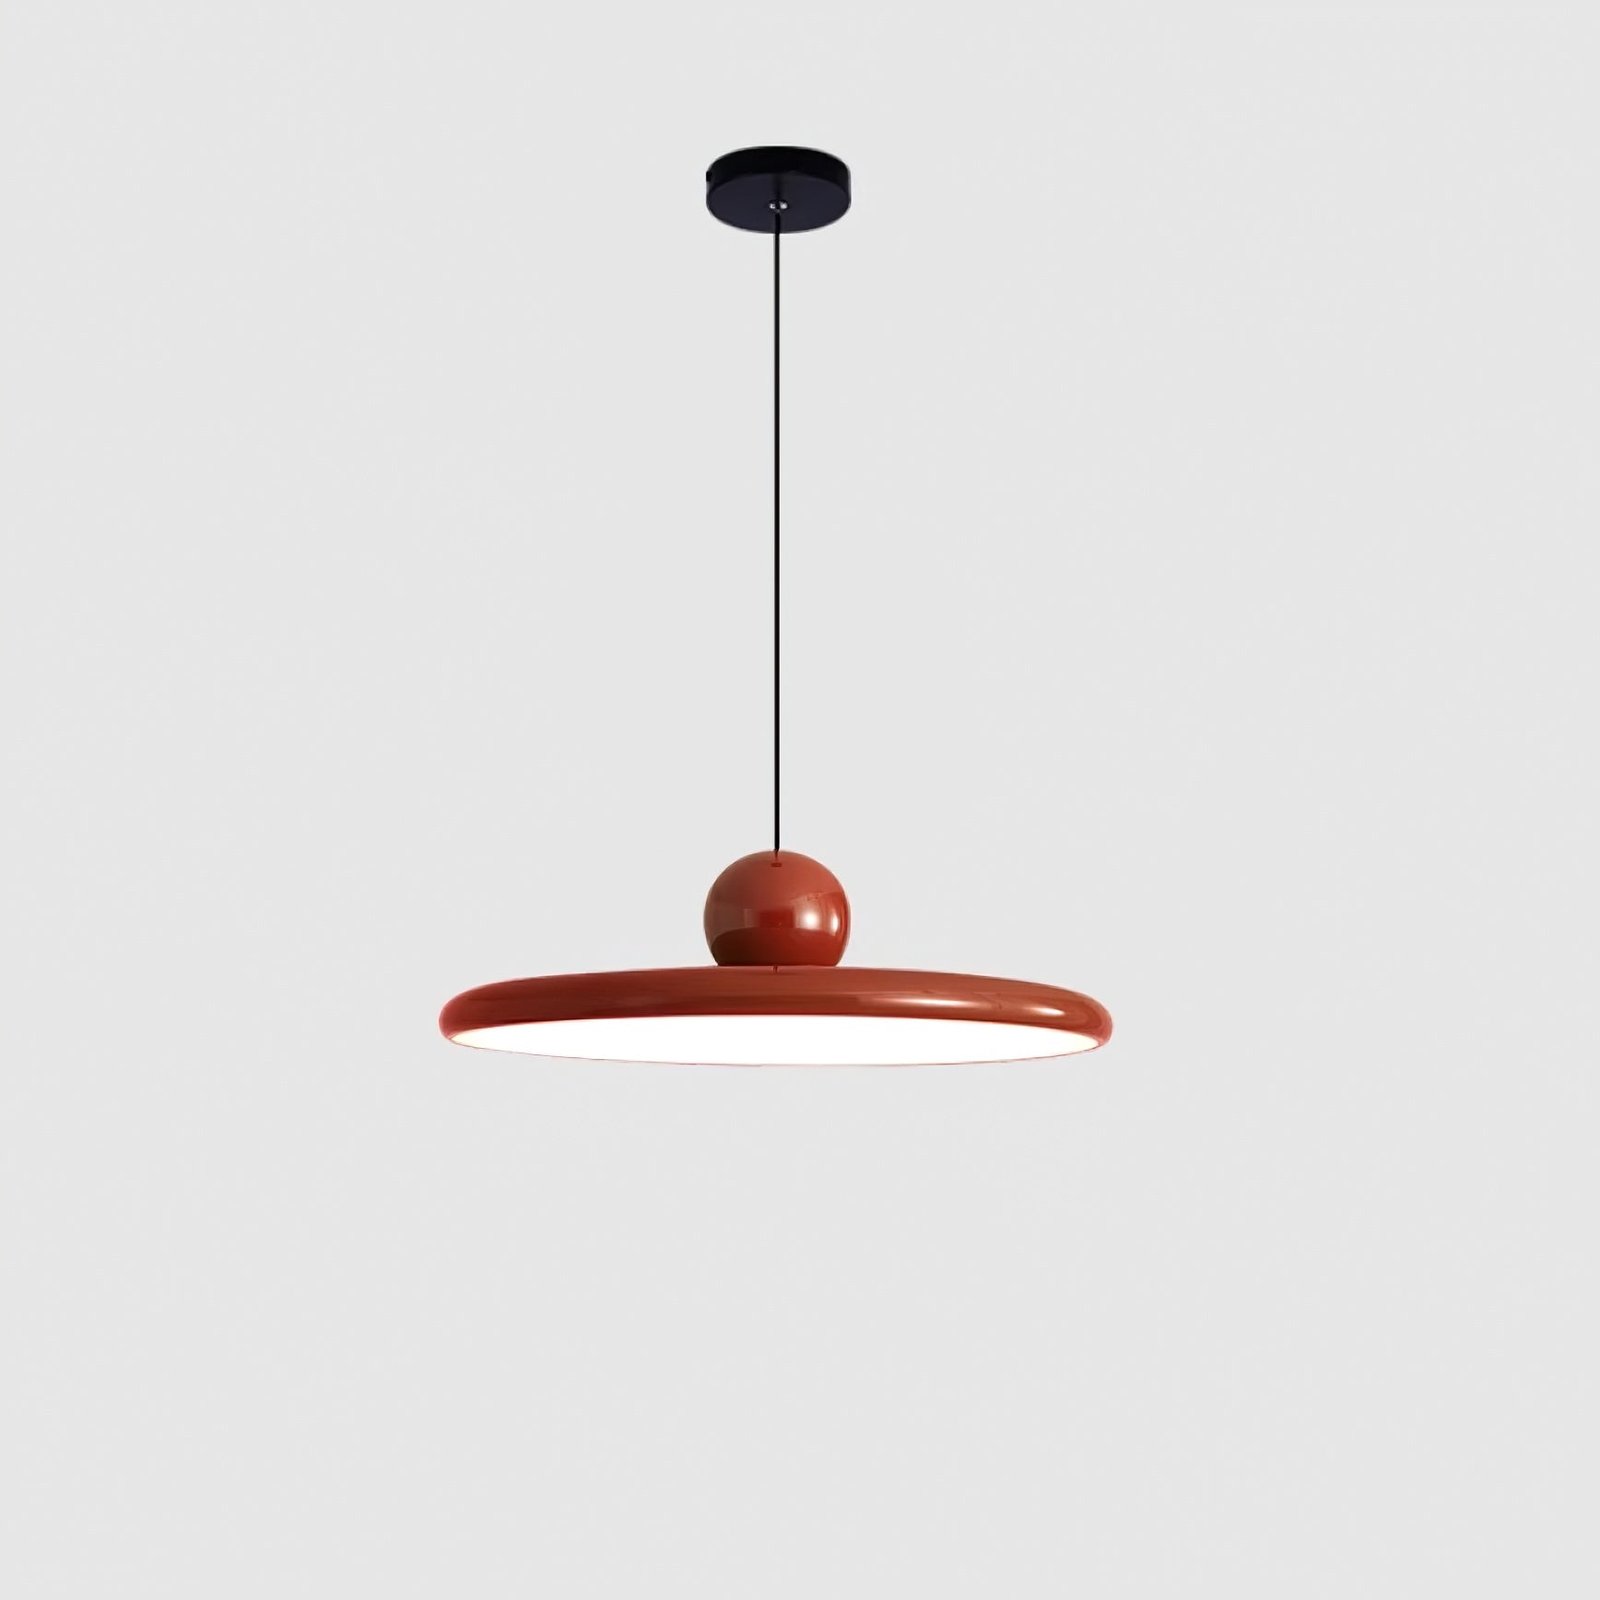 Red Lola Pendant Lamp with Cool White Lighting, measuring 19.6" in diameter and 4.7" in height (50cm x 12cm)